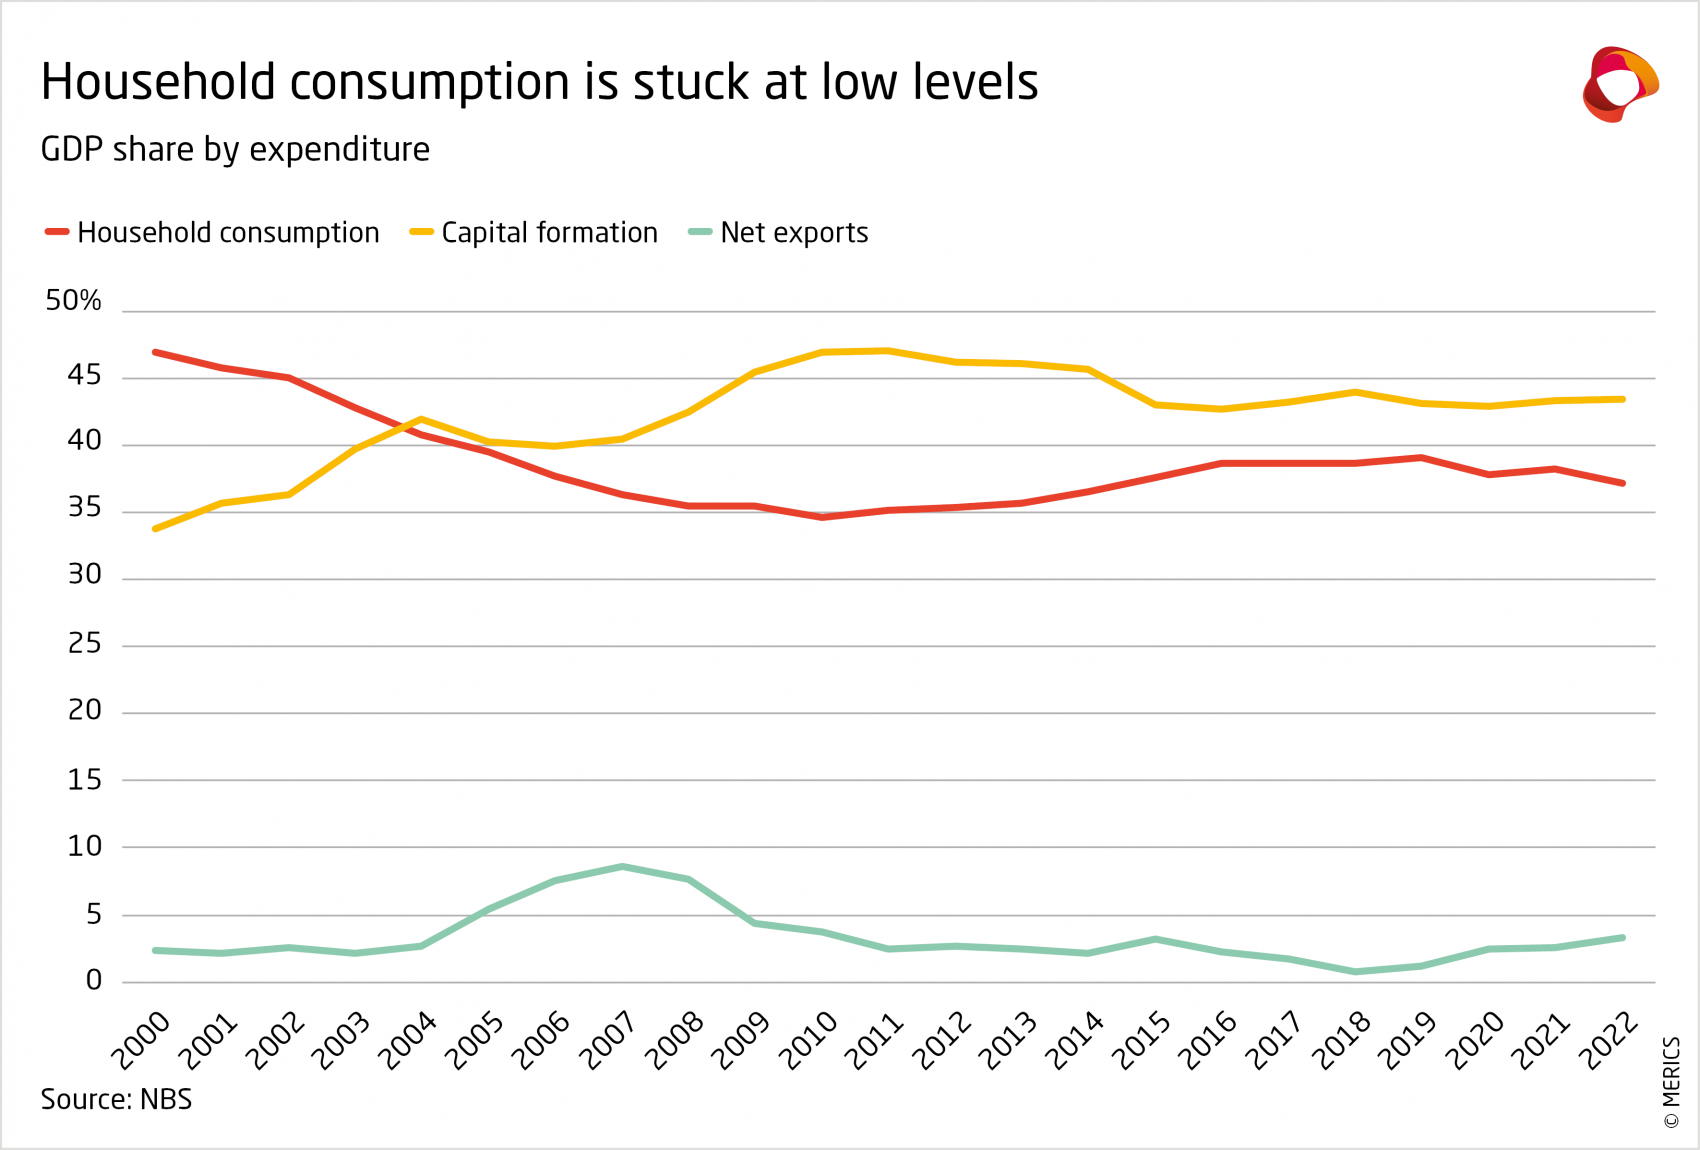 merics-report-the-party-knows-best-household-consumption-is-stuck-at-low-levels-exhibit-10.png